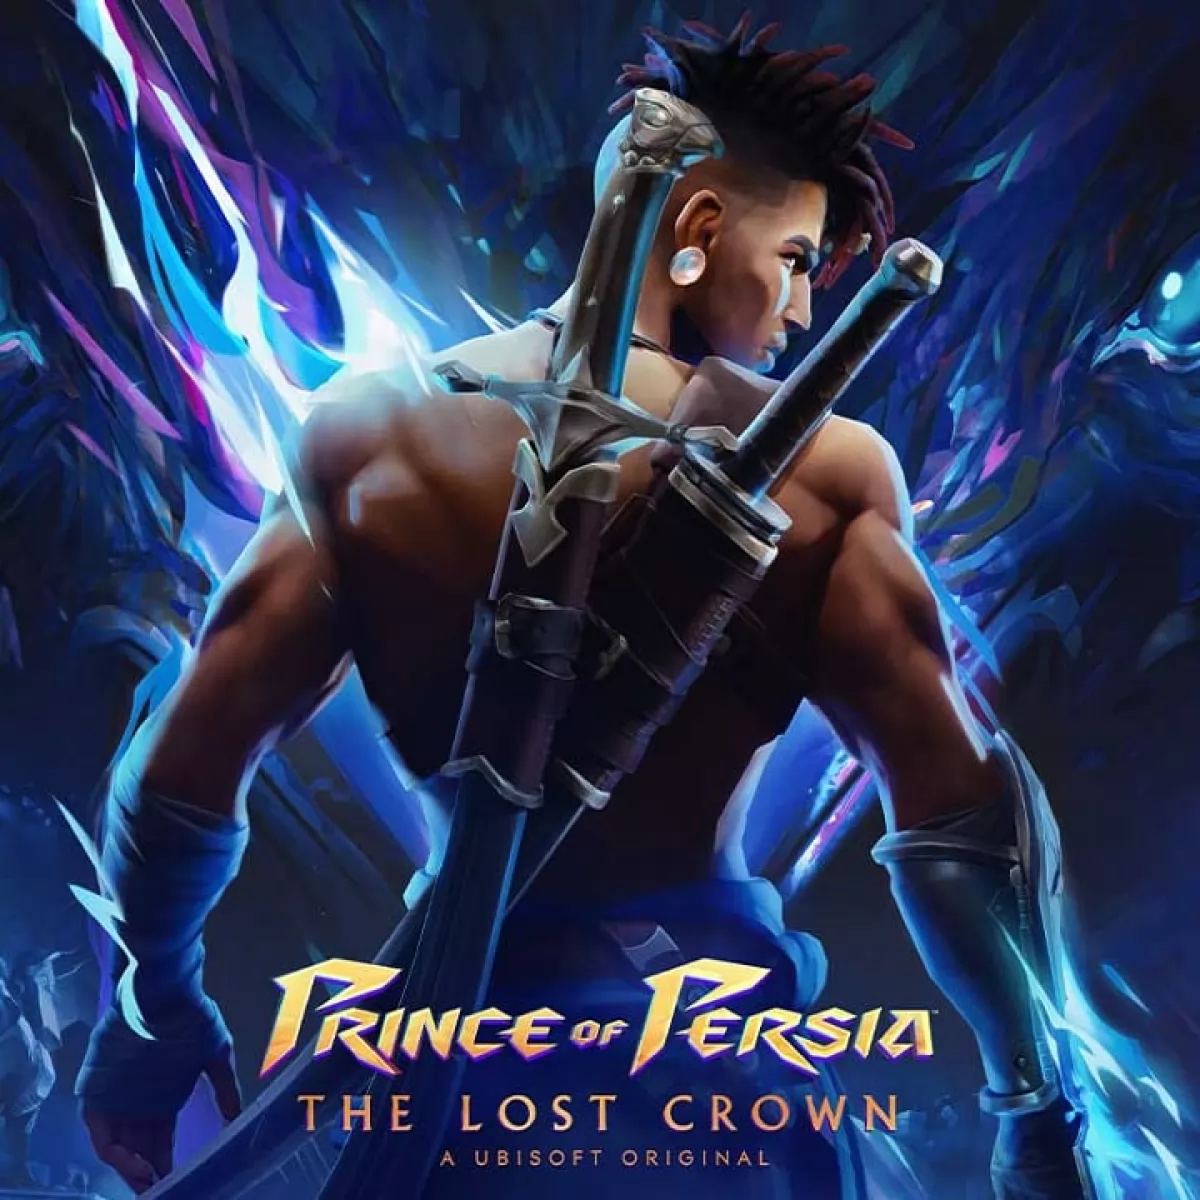 Prince of Persia The Lost Crown Surprises Fans Wanting More - Fextralife